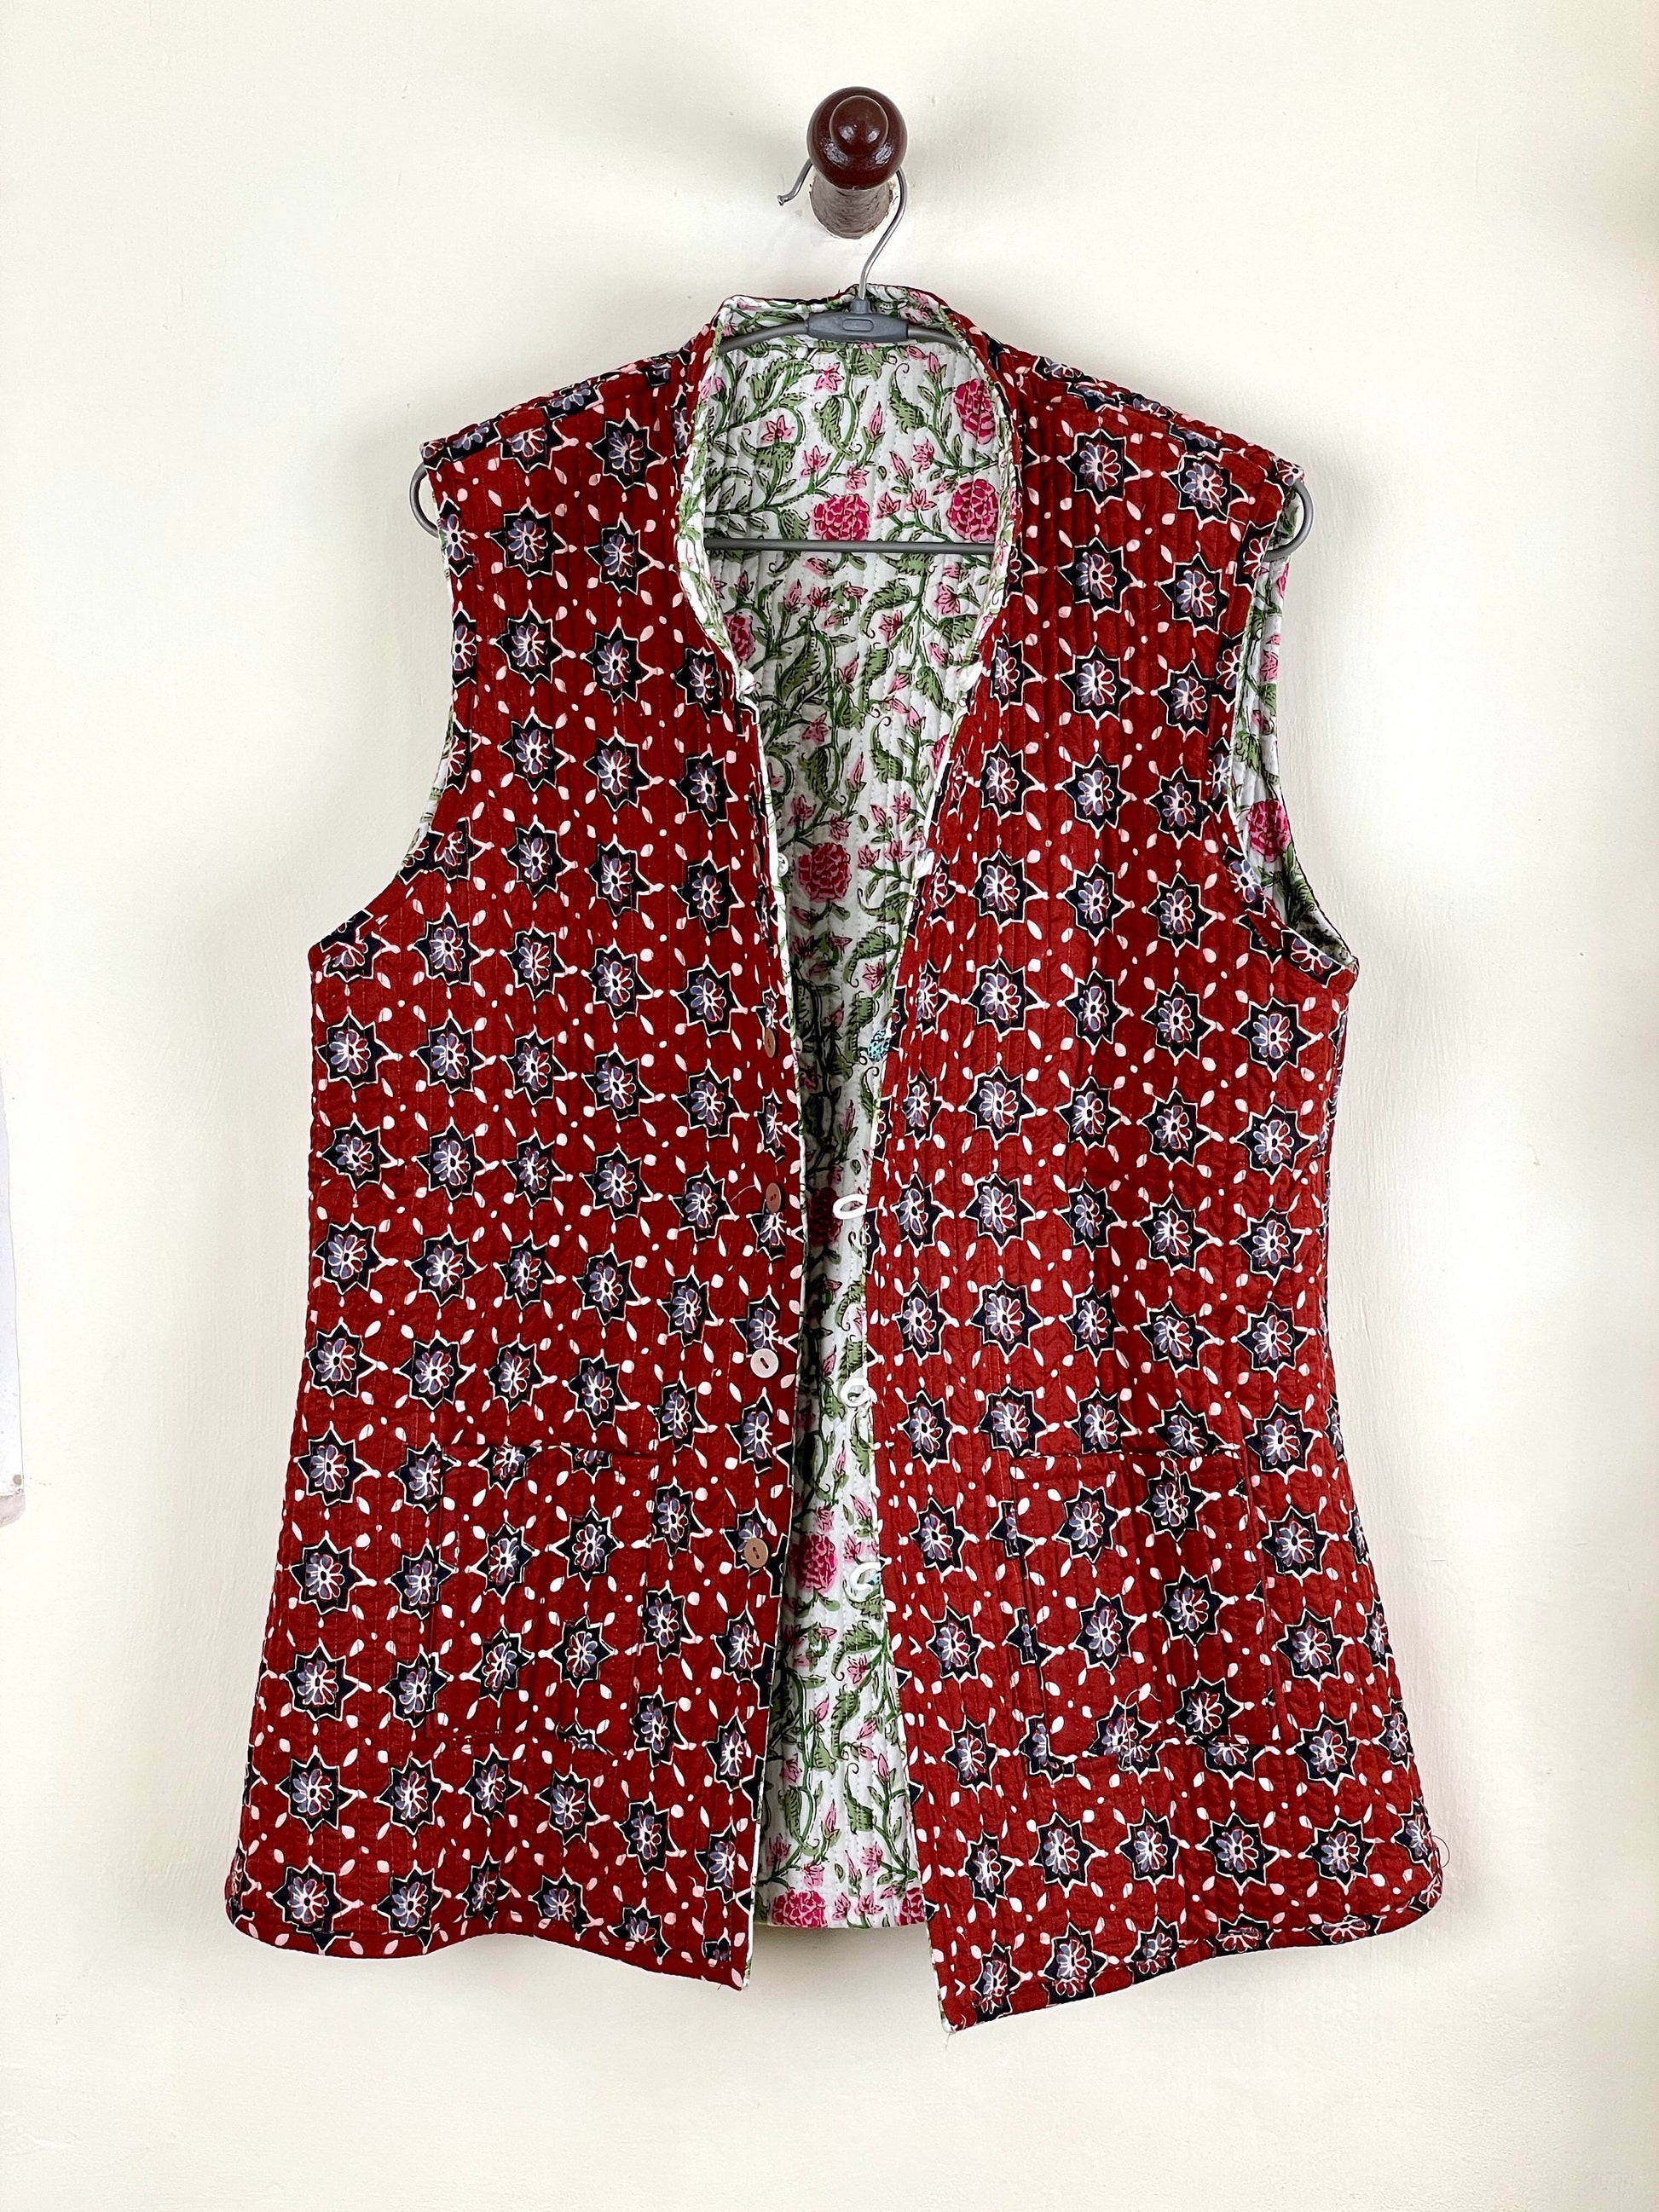 Indian Handmade Quilted Cotton Sleeveless Jacket White & Pink Floral Stylish Women's Vest, Reversible Waistcoat for Her